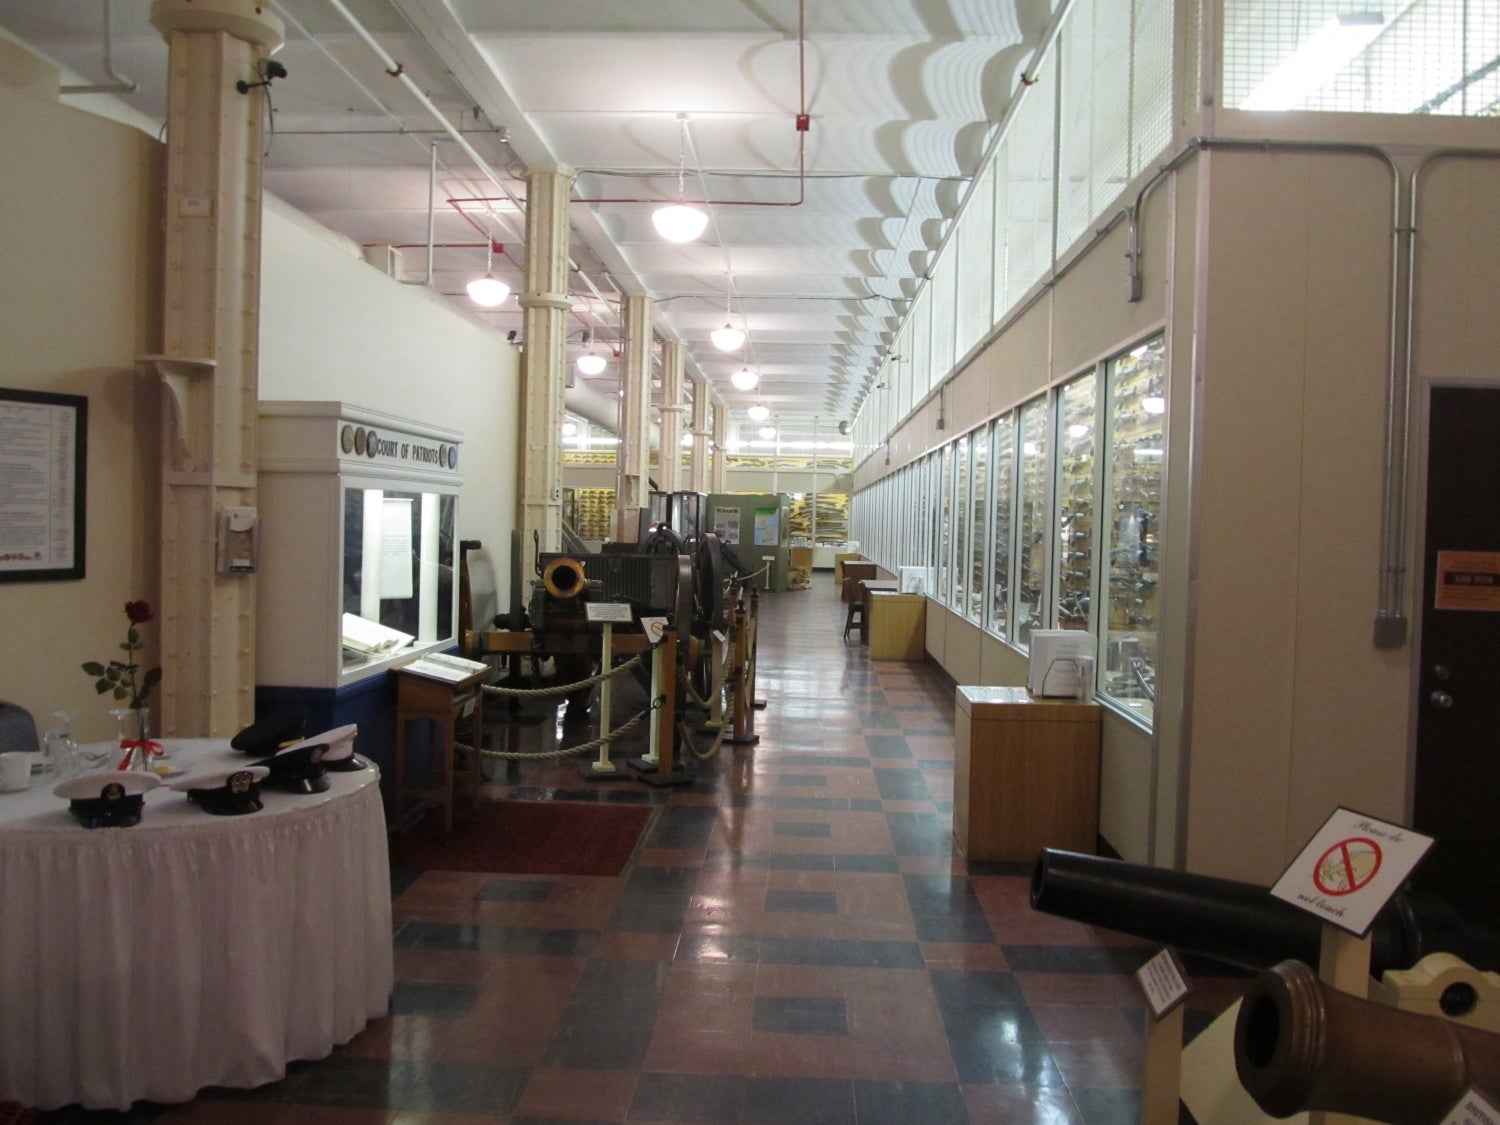 The entrance to the main exhibit hall in the museum. The entire wall on the right and at the rear is completed stacked from floor to ceiling with firearms on display. Descriptions of the various small arms are incorporated within the binders on the right on the various tables. 